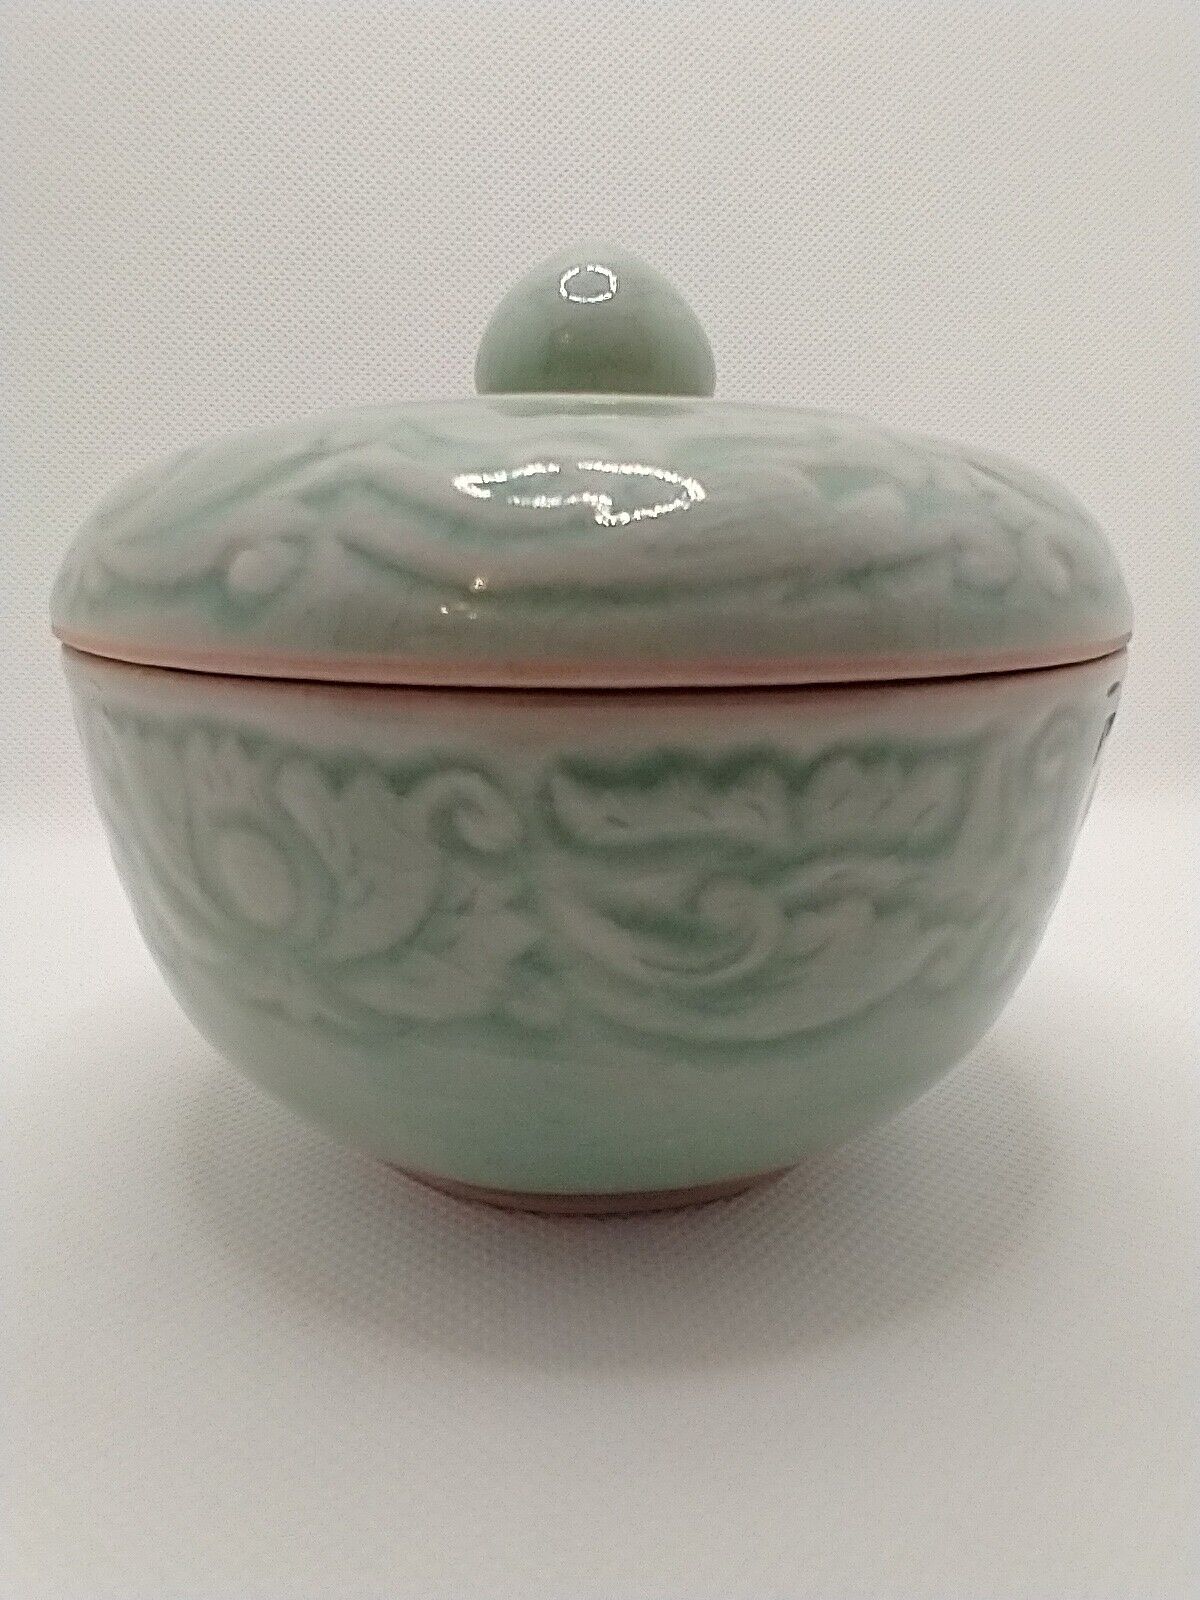 MOTHER'S DAY VINTAGE AUTHENTIC BAAN CELADON THAILAND RICE BOWL GREEN 4.5x4.25